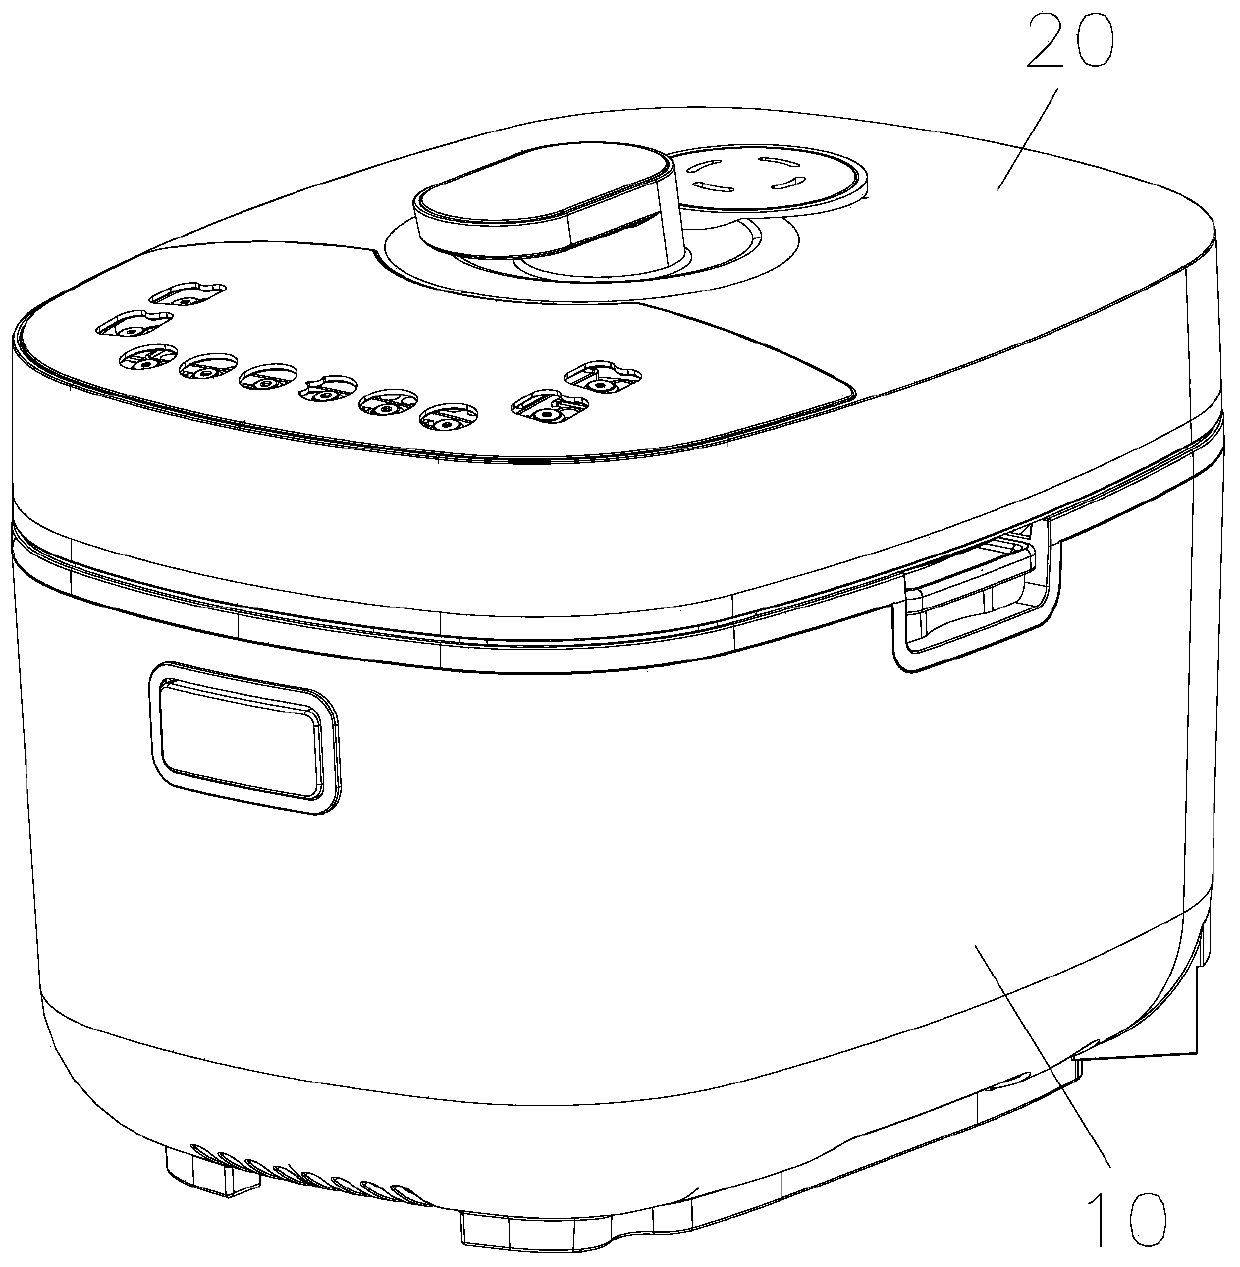 Control method of cooking appliance